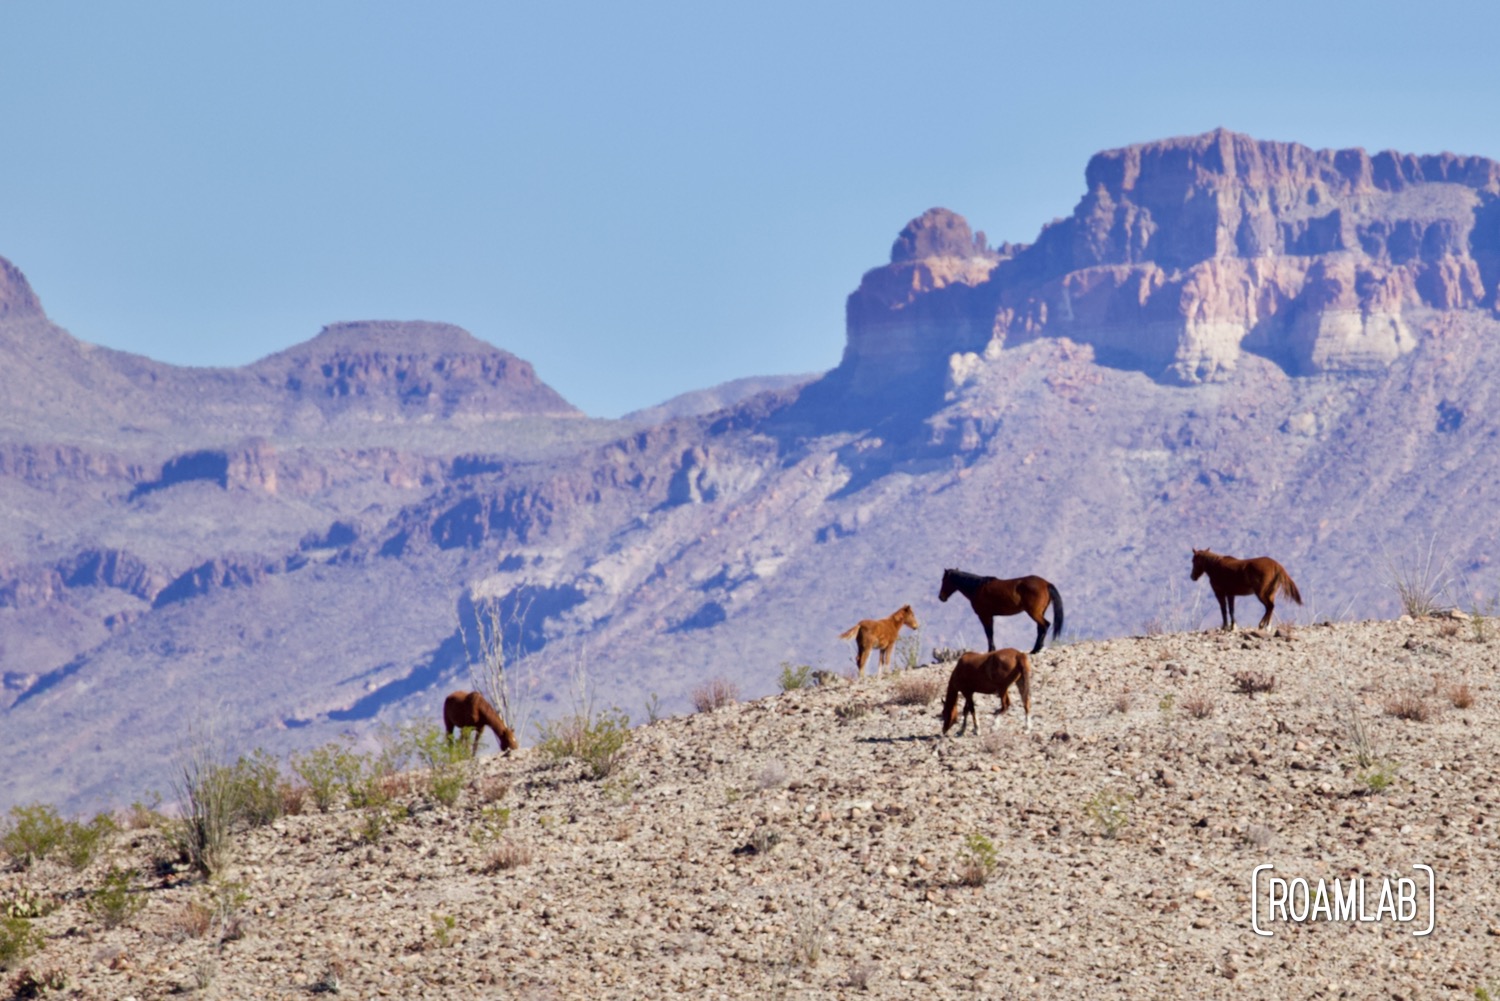 Five horses standing on a ridge line with mountains in the background in Big Bend National Park, Texas.